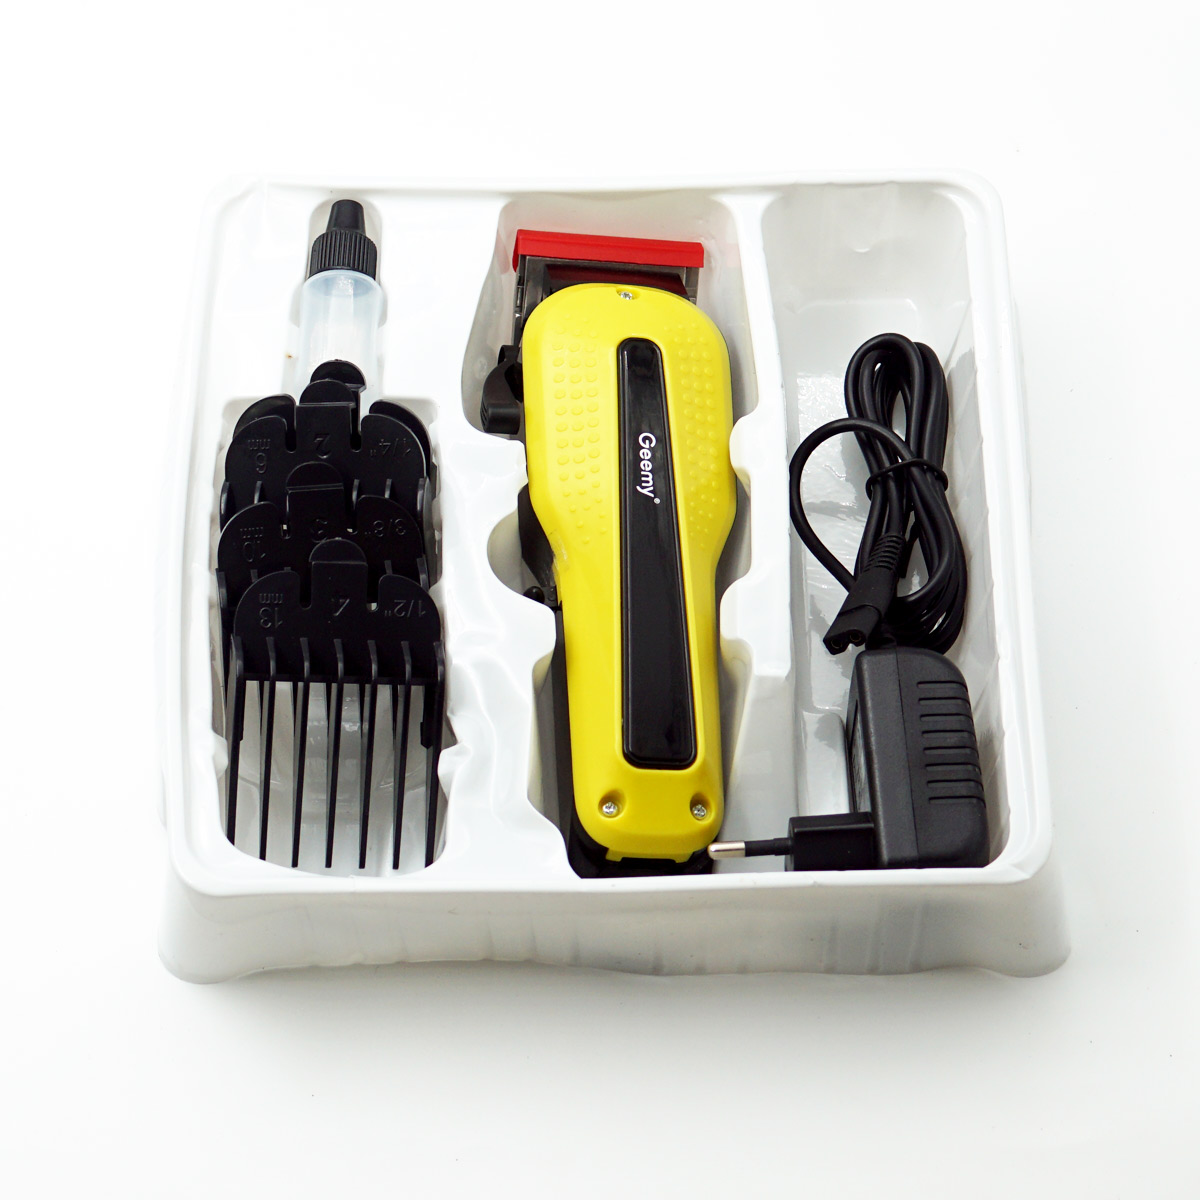 Geemy Professional hair clipper 6671 clpper LED display indigreter Trimmer 120 min Runtime 4 Length Settings  (Yellow) SKU 96594